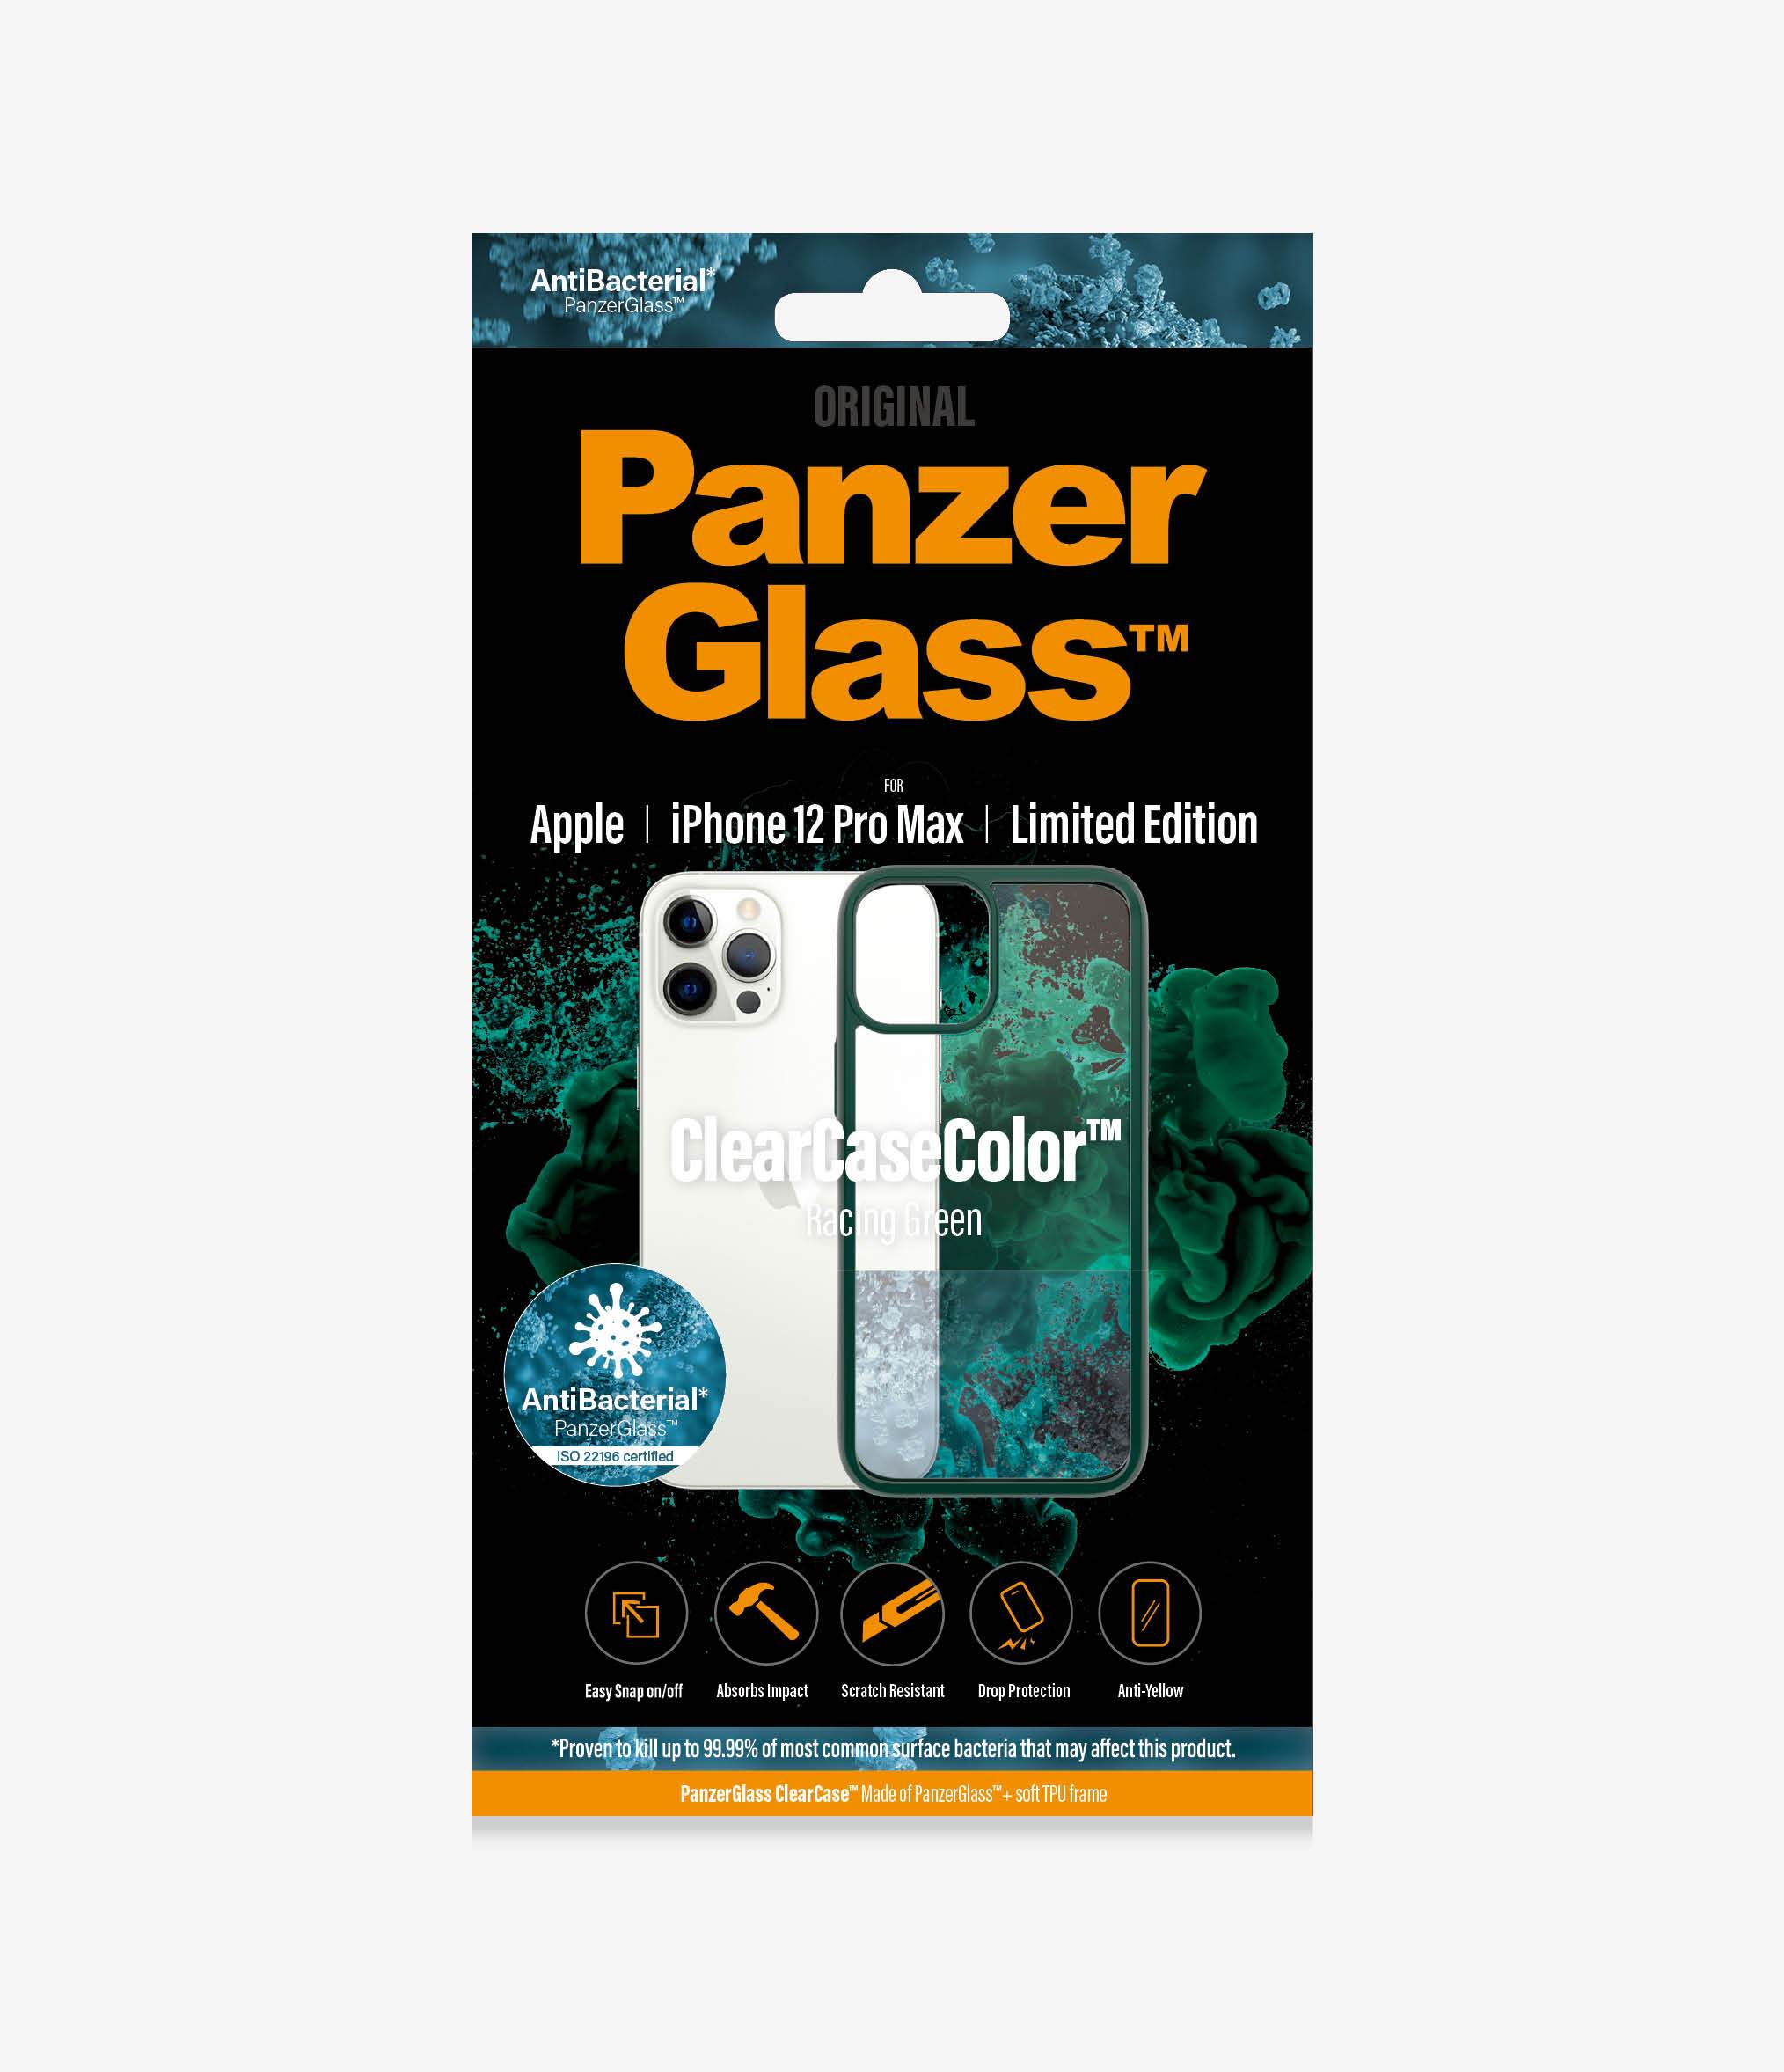 PanzerGlass™ ClearCaseColor™ Apple iPhone 12 Pro Max - Racing Green Limited Edition (0269), Slim fashionable design, Tempered anti-aging glass back